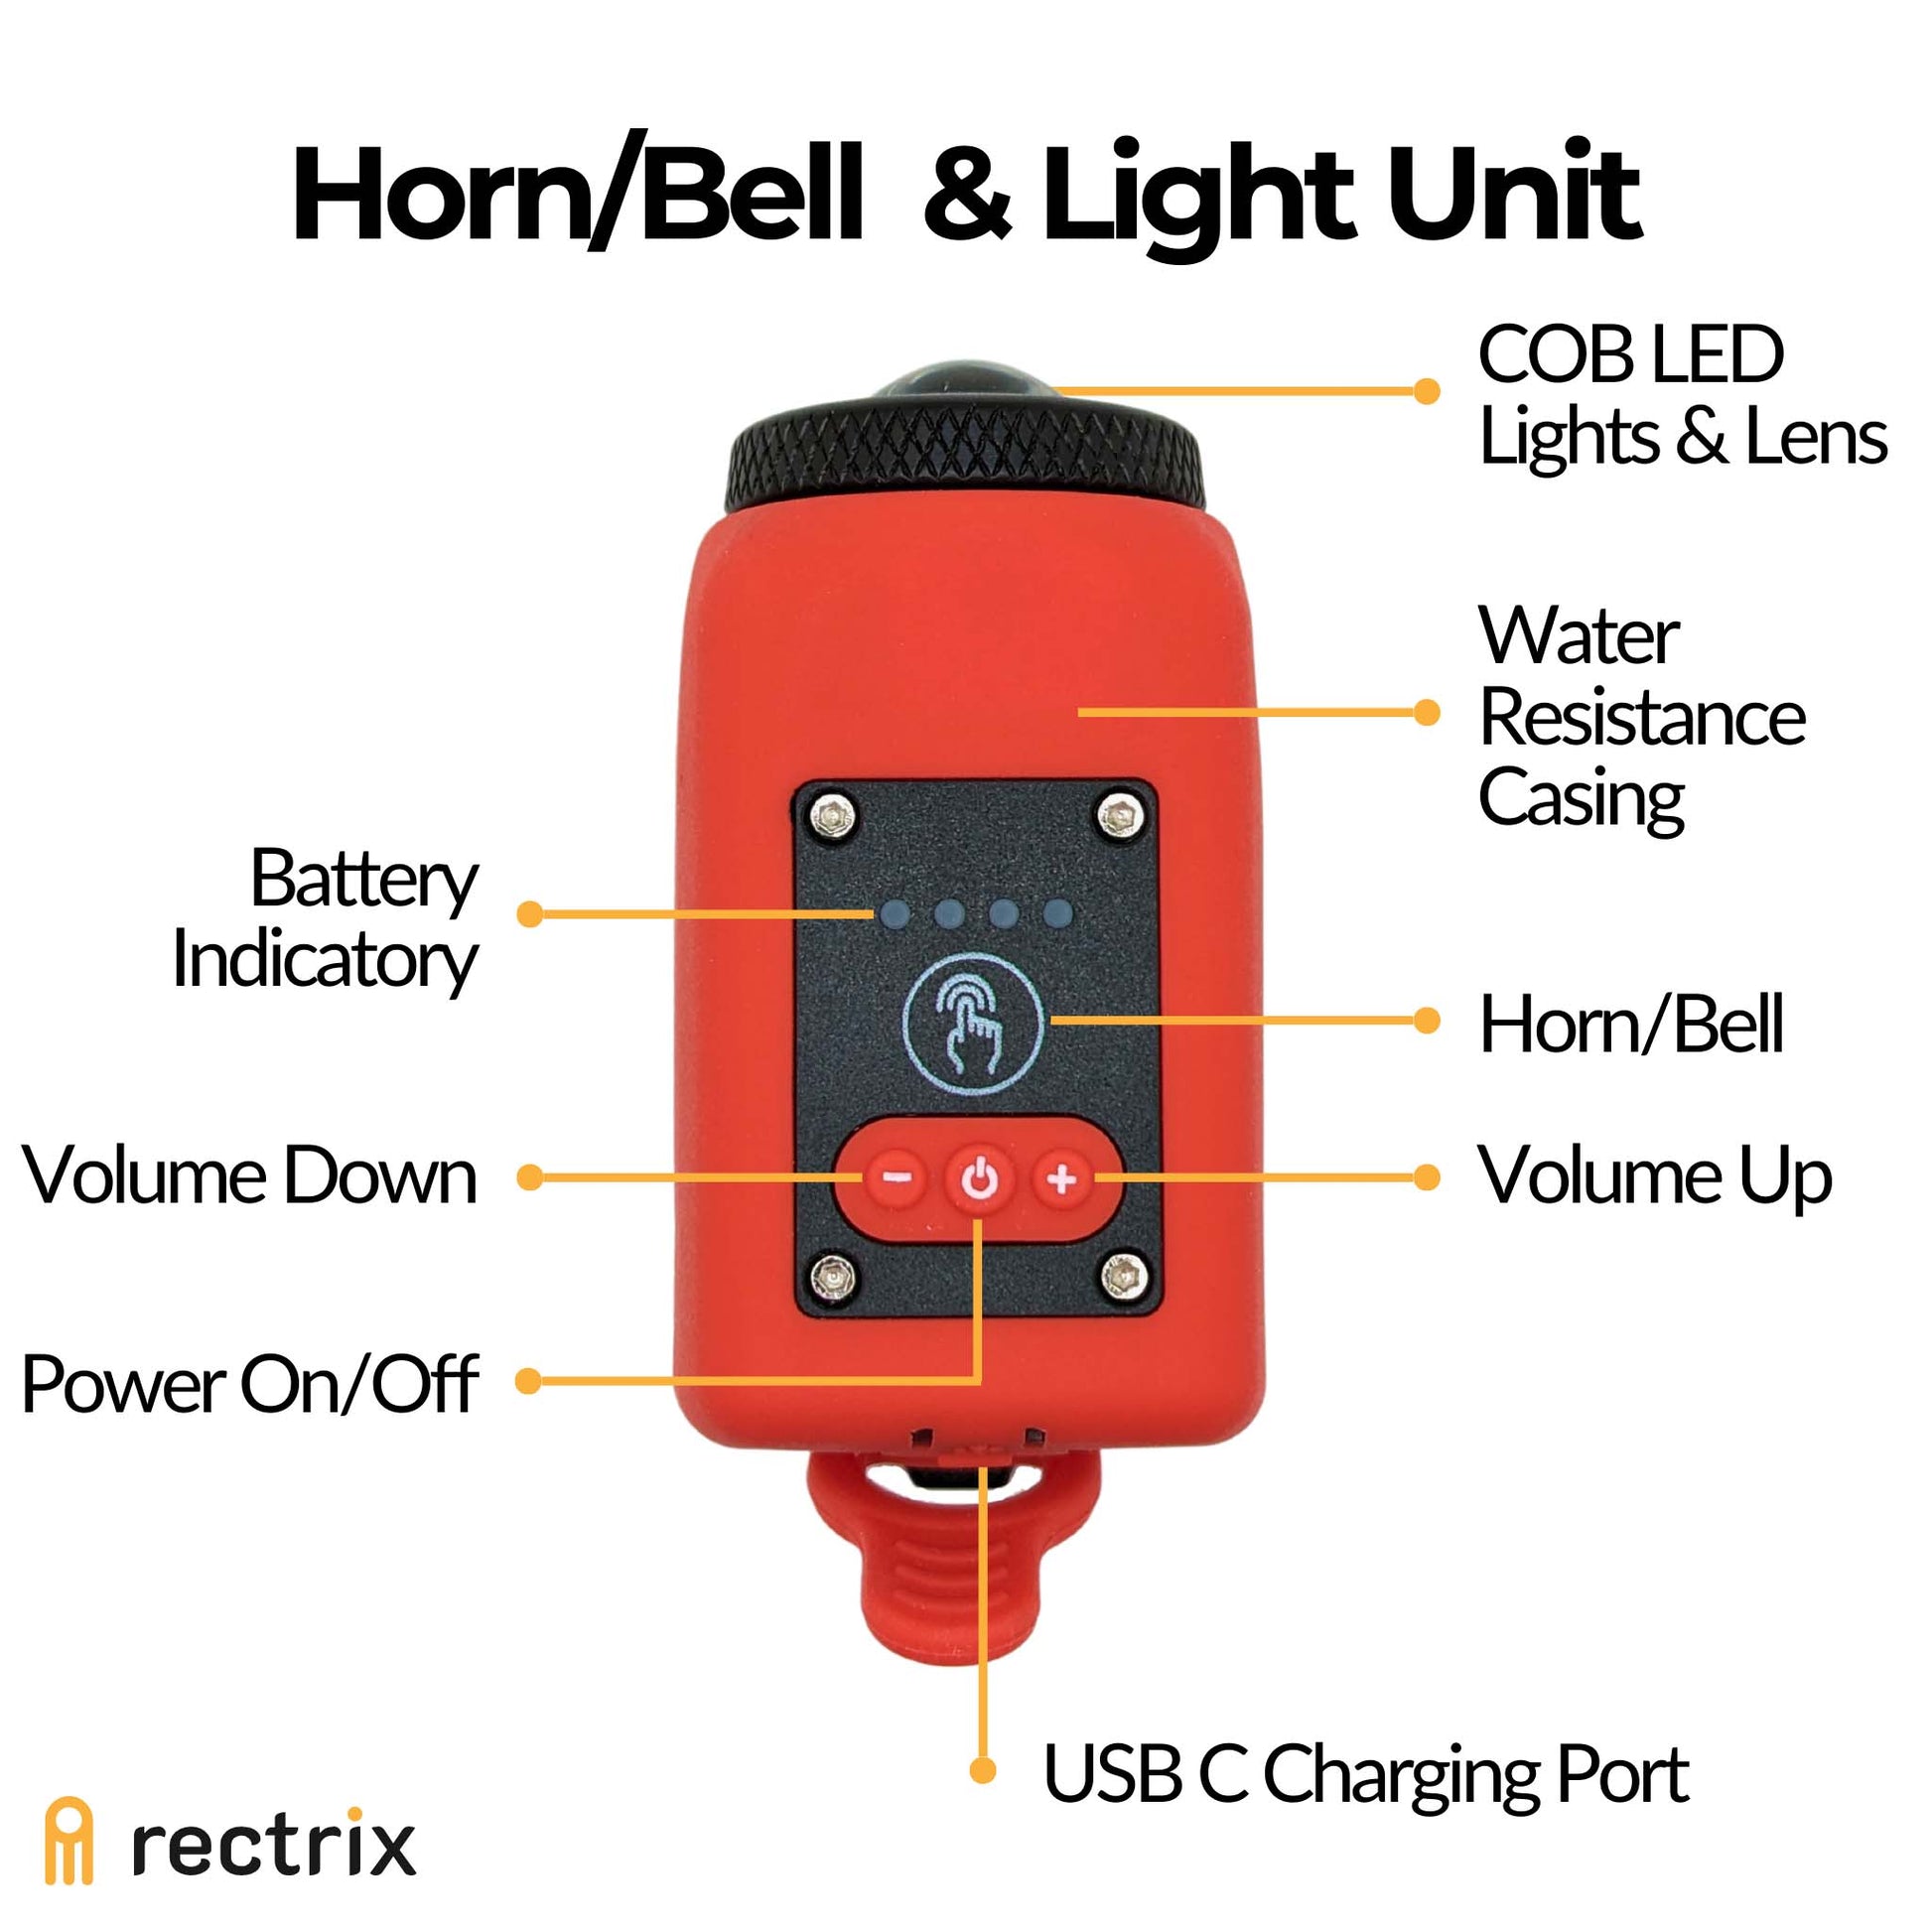 Close-up view of the product's main unit housing the light, horn, battery indicator, power button, and volume control